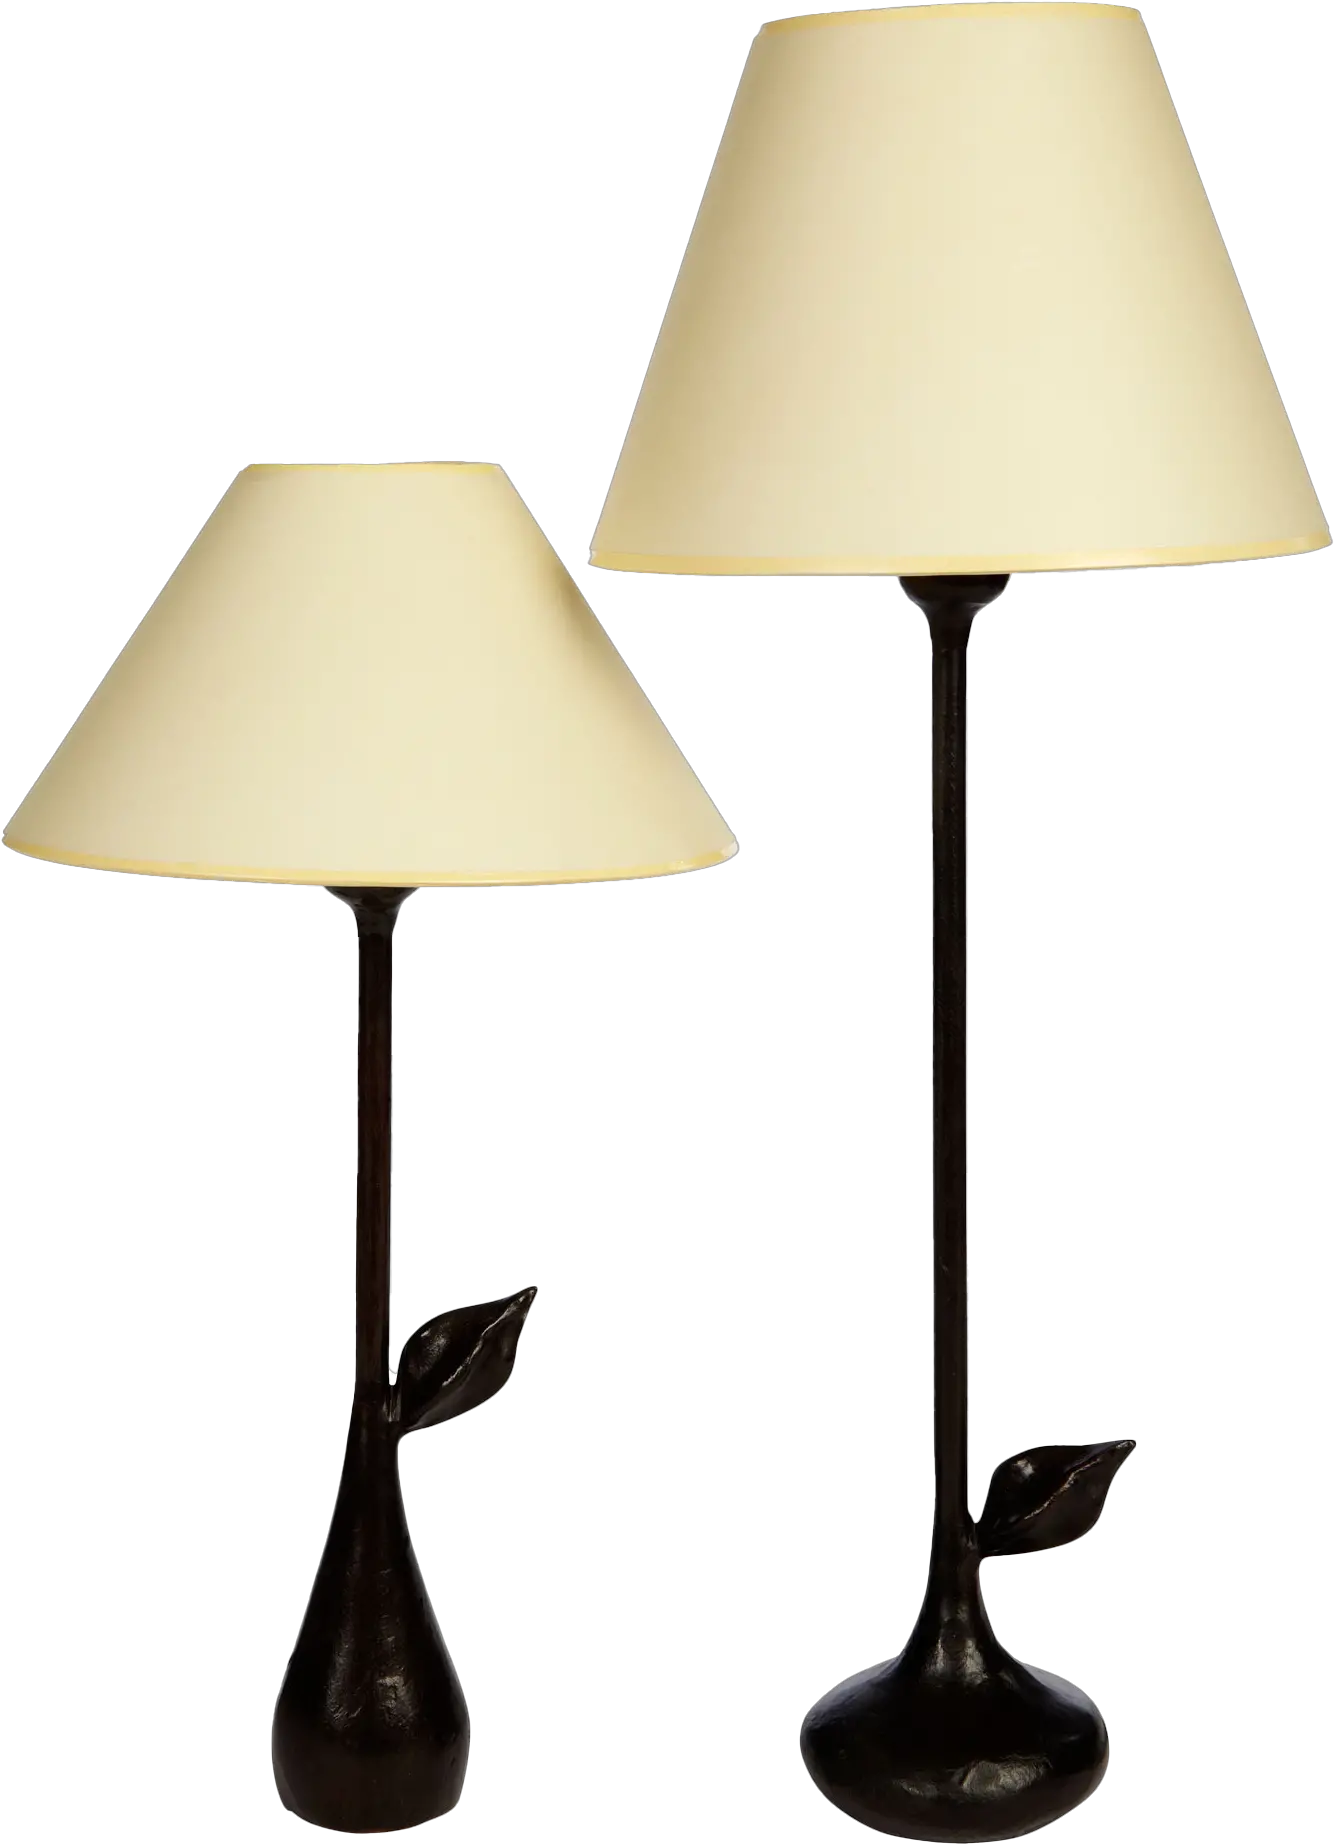 Lamp Png Hd Quality Play Lampshade Lamp Png